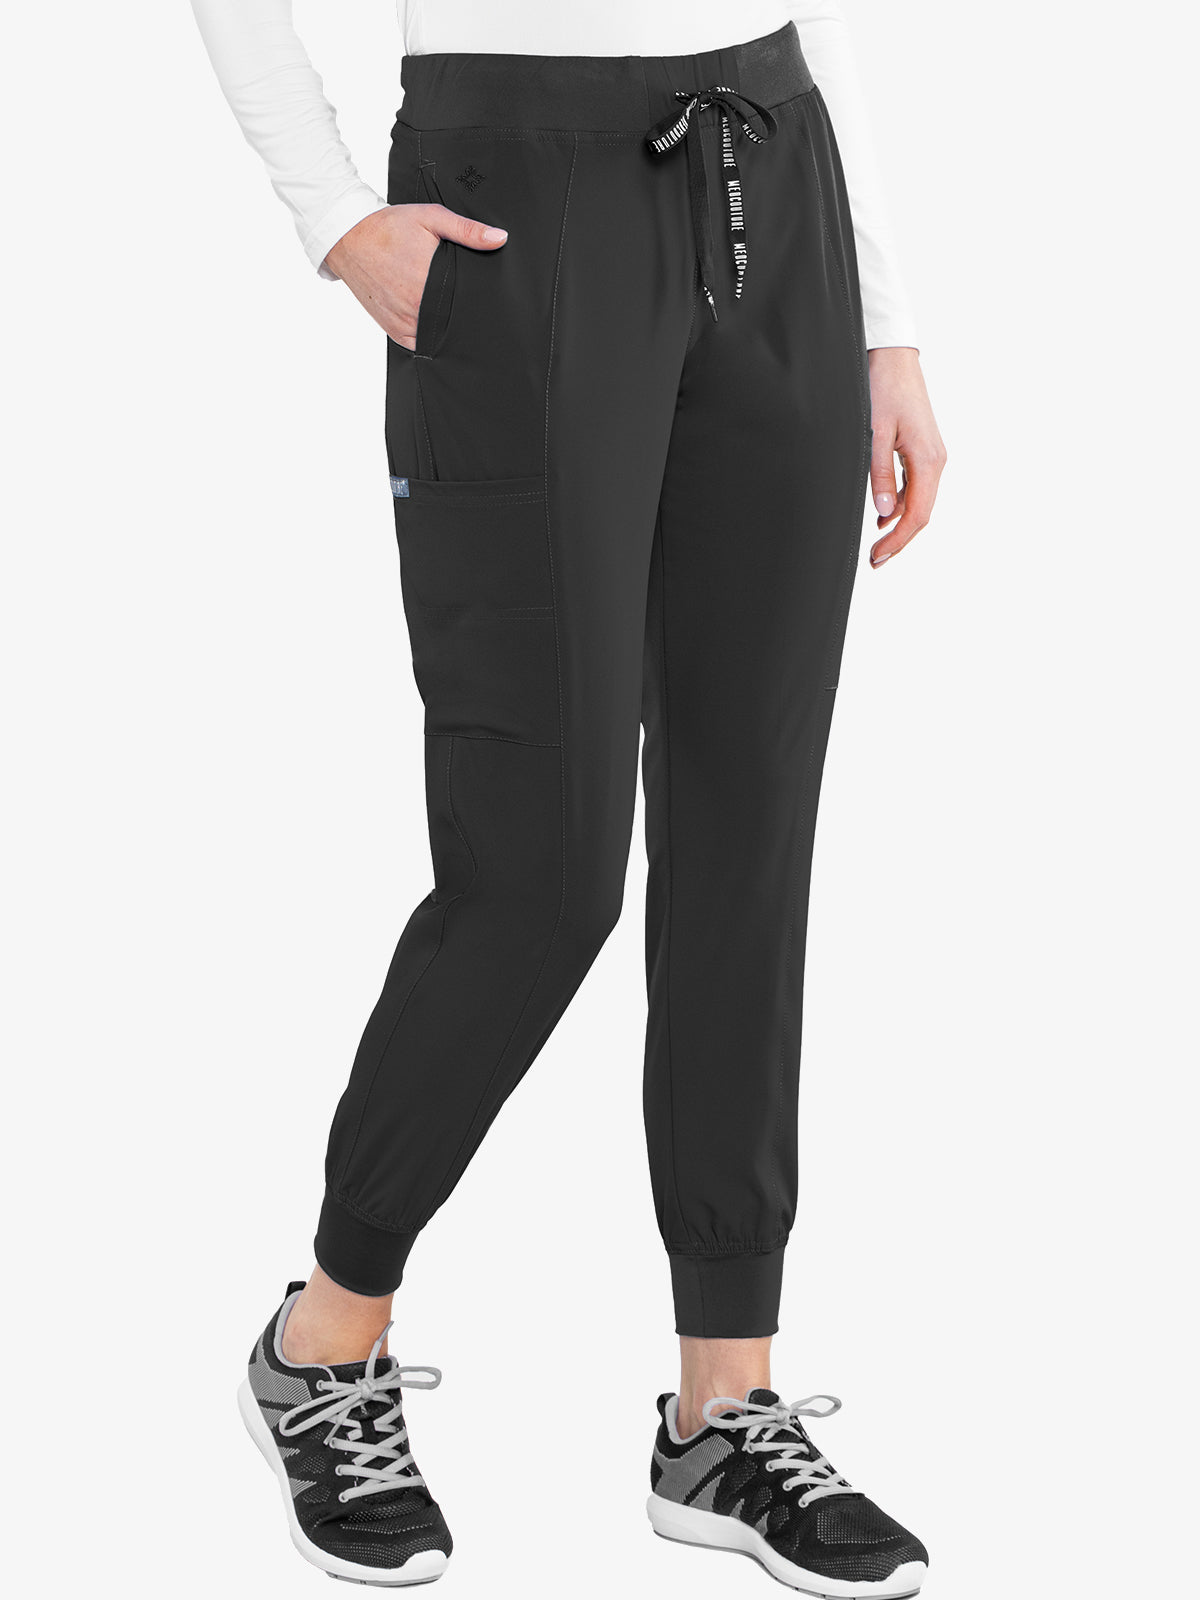 Med Couture 7710 Jogger Yoga Tall Pant For Women